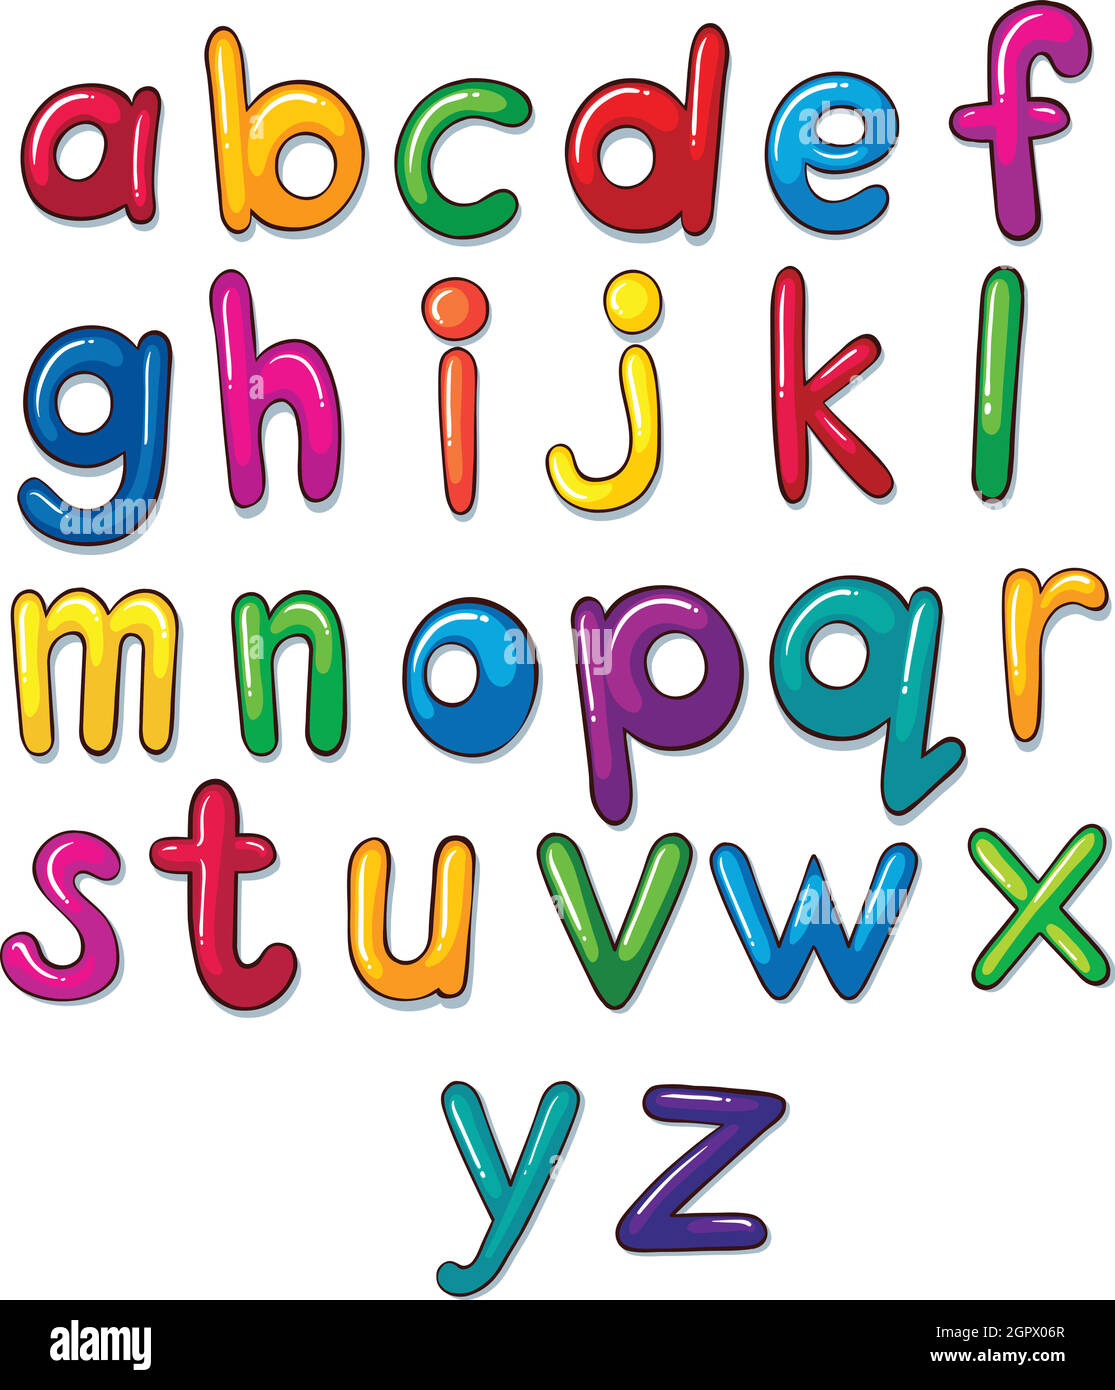 Letters of the alphabet artwork Stock Vector